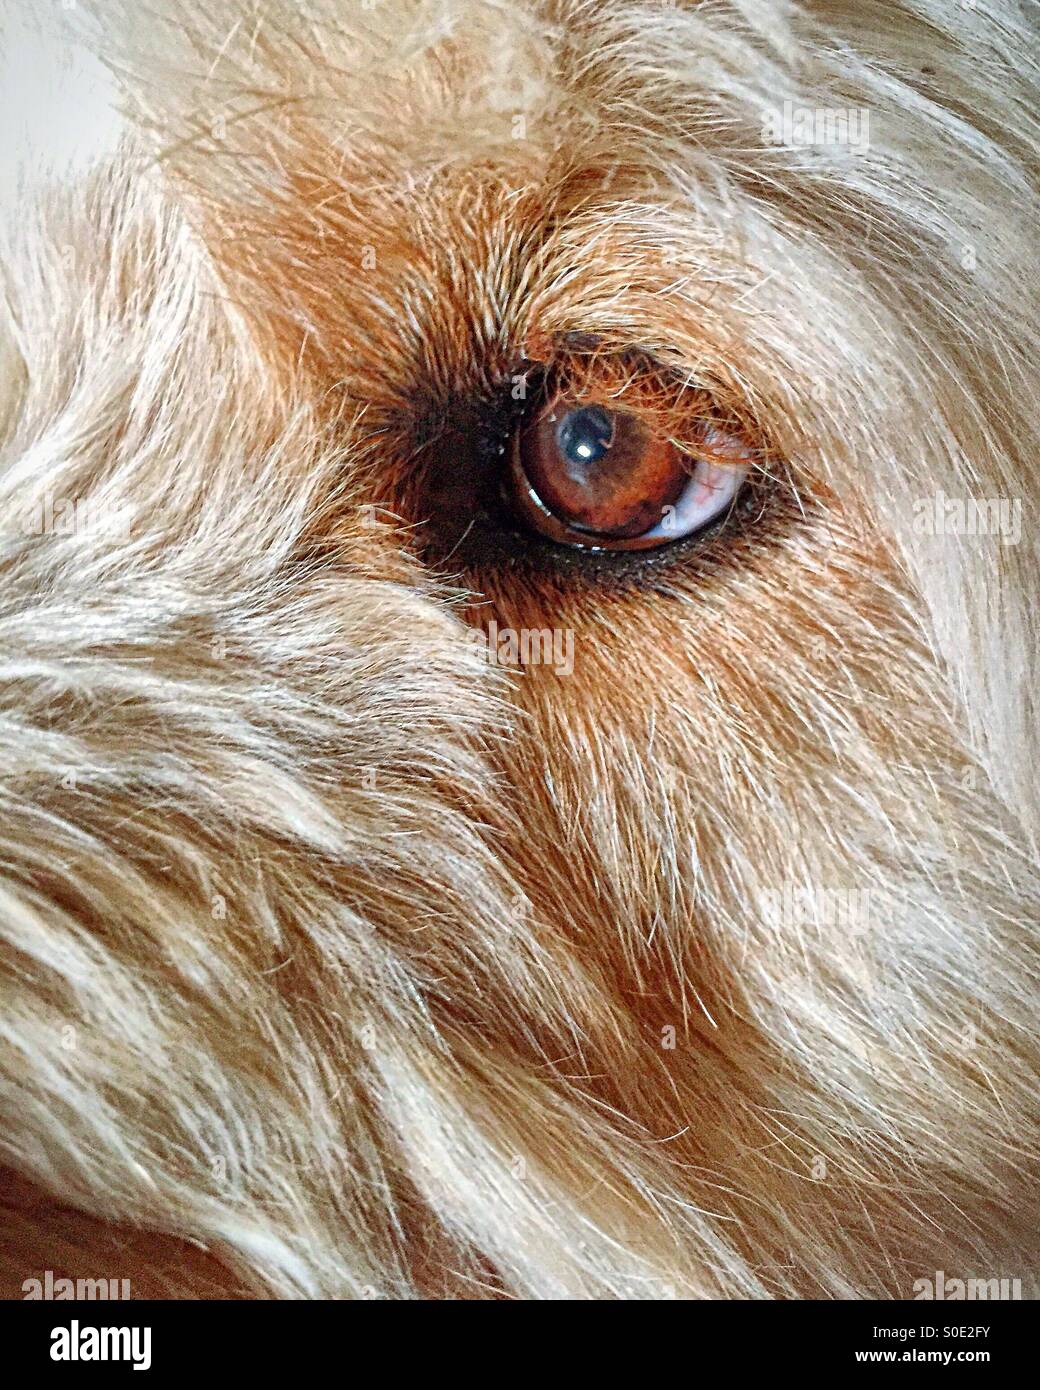 Close up of a dog's eye Banque D'Images